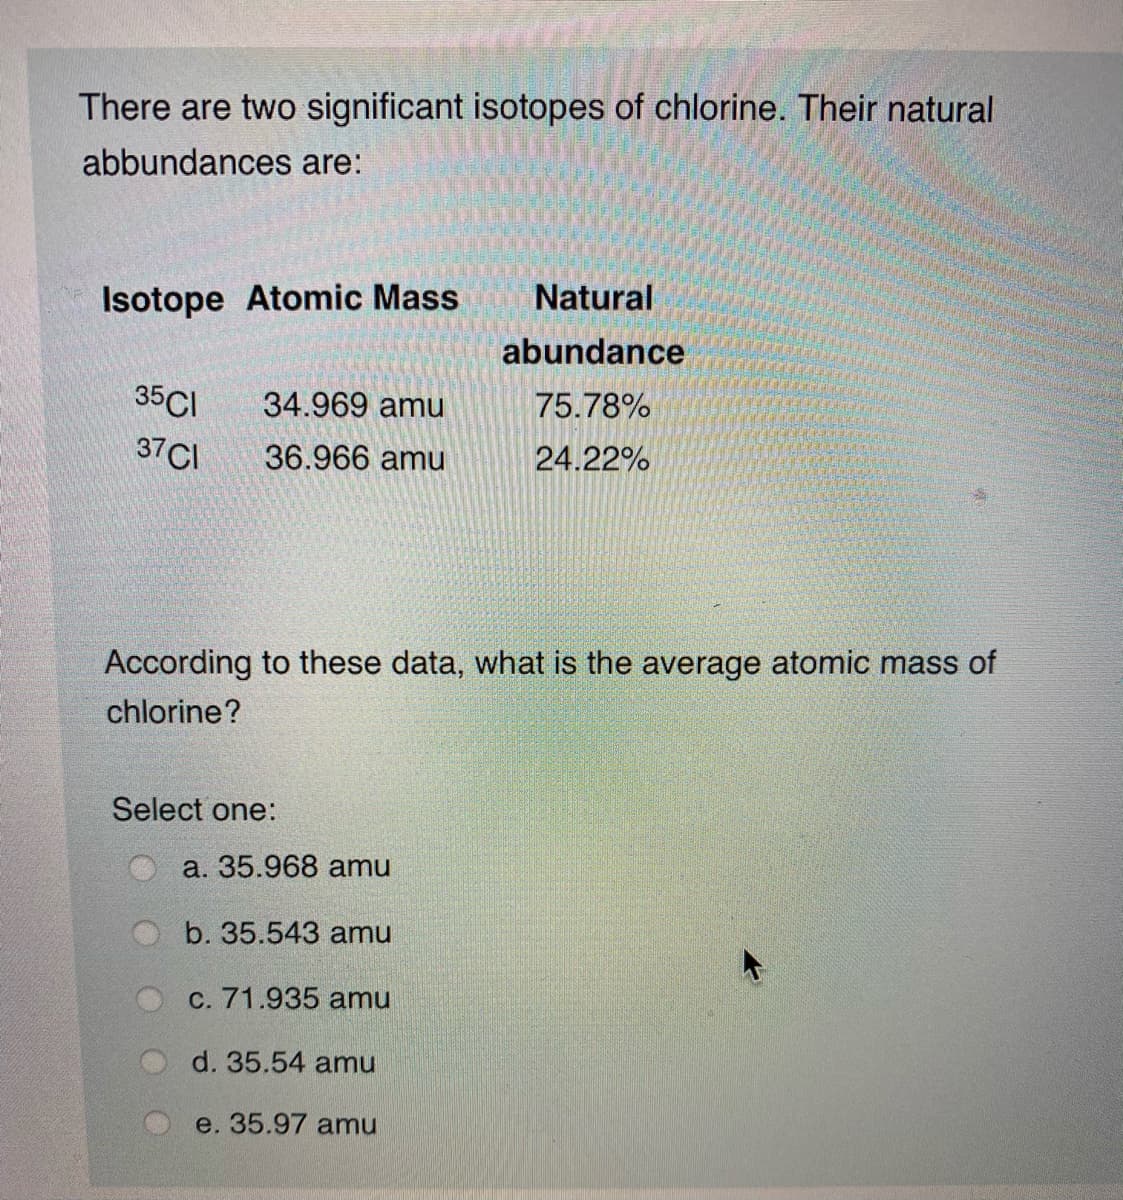 There are two significant isotopes of chlorine. Their natural
abbundances are:
Isotope Atomic Mass
Natural
abundance
35CI
34.969 amu
75.78%
37CI
36.966 amu
24.22%
According to these data, what is the average atomic mass of
chlorine?
Select one:
a. 35.968 amu
b. 35.543 amu
C. 71.935 amu
d. 35.54 amu
e. 35.97 amu
